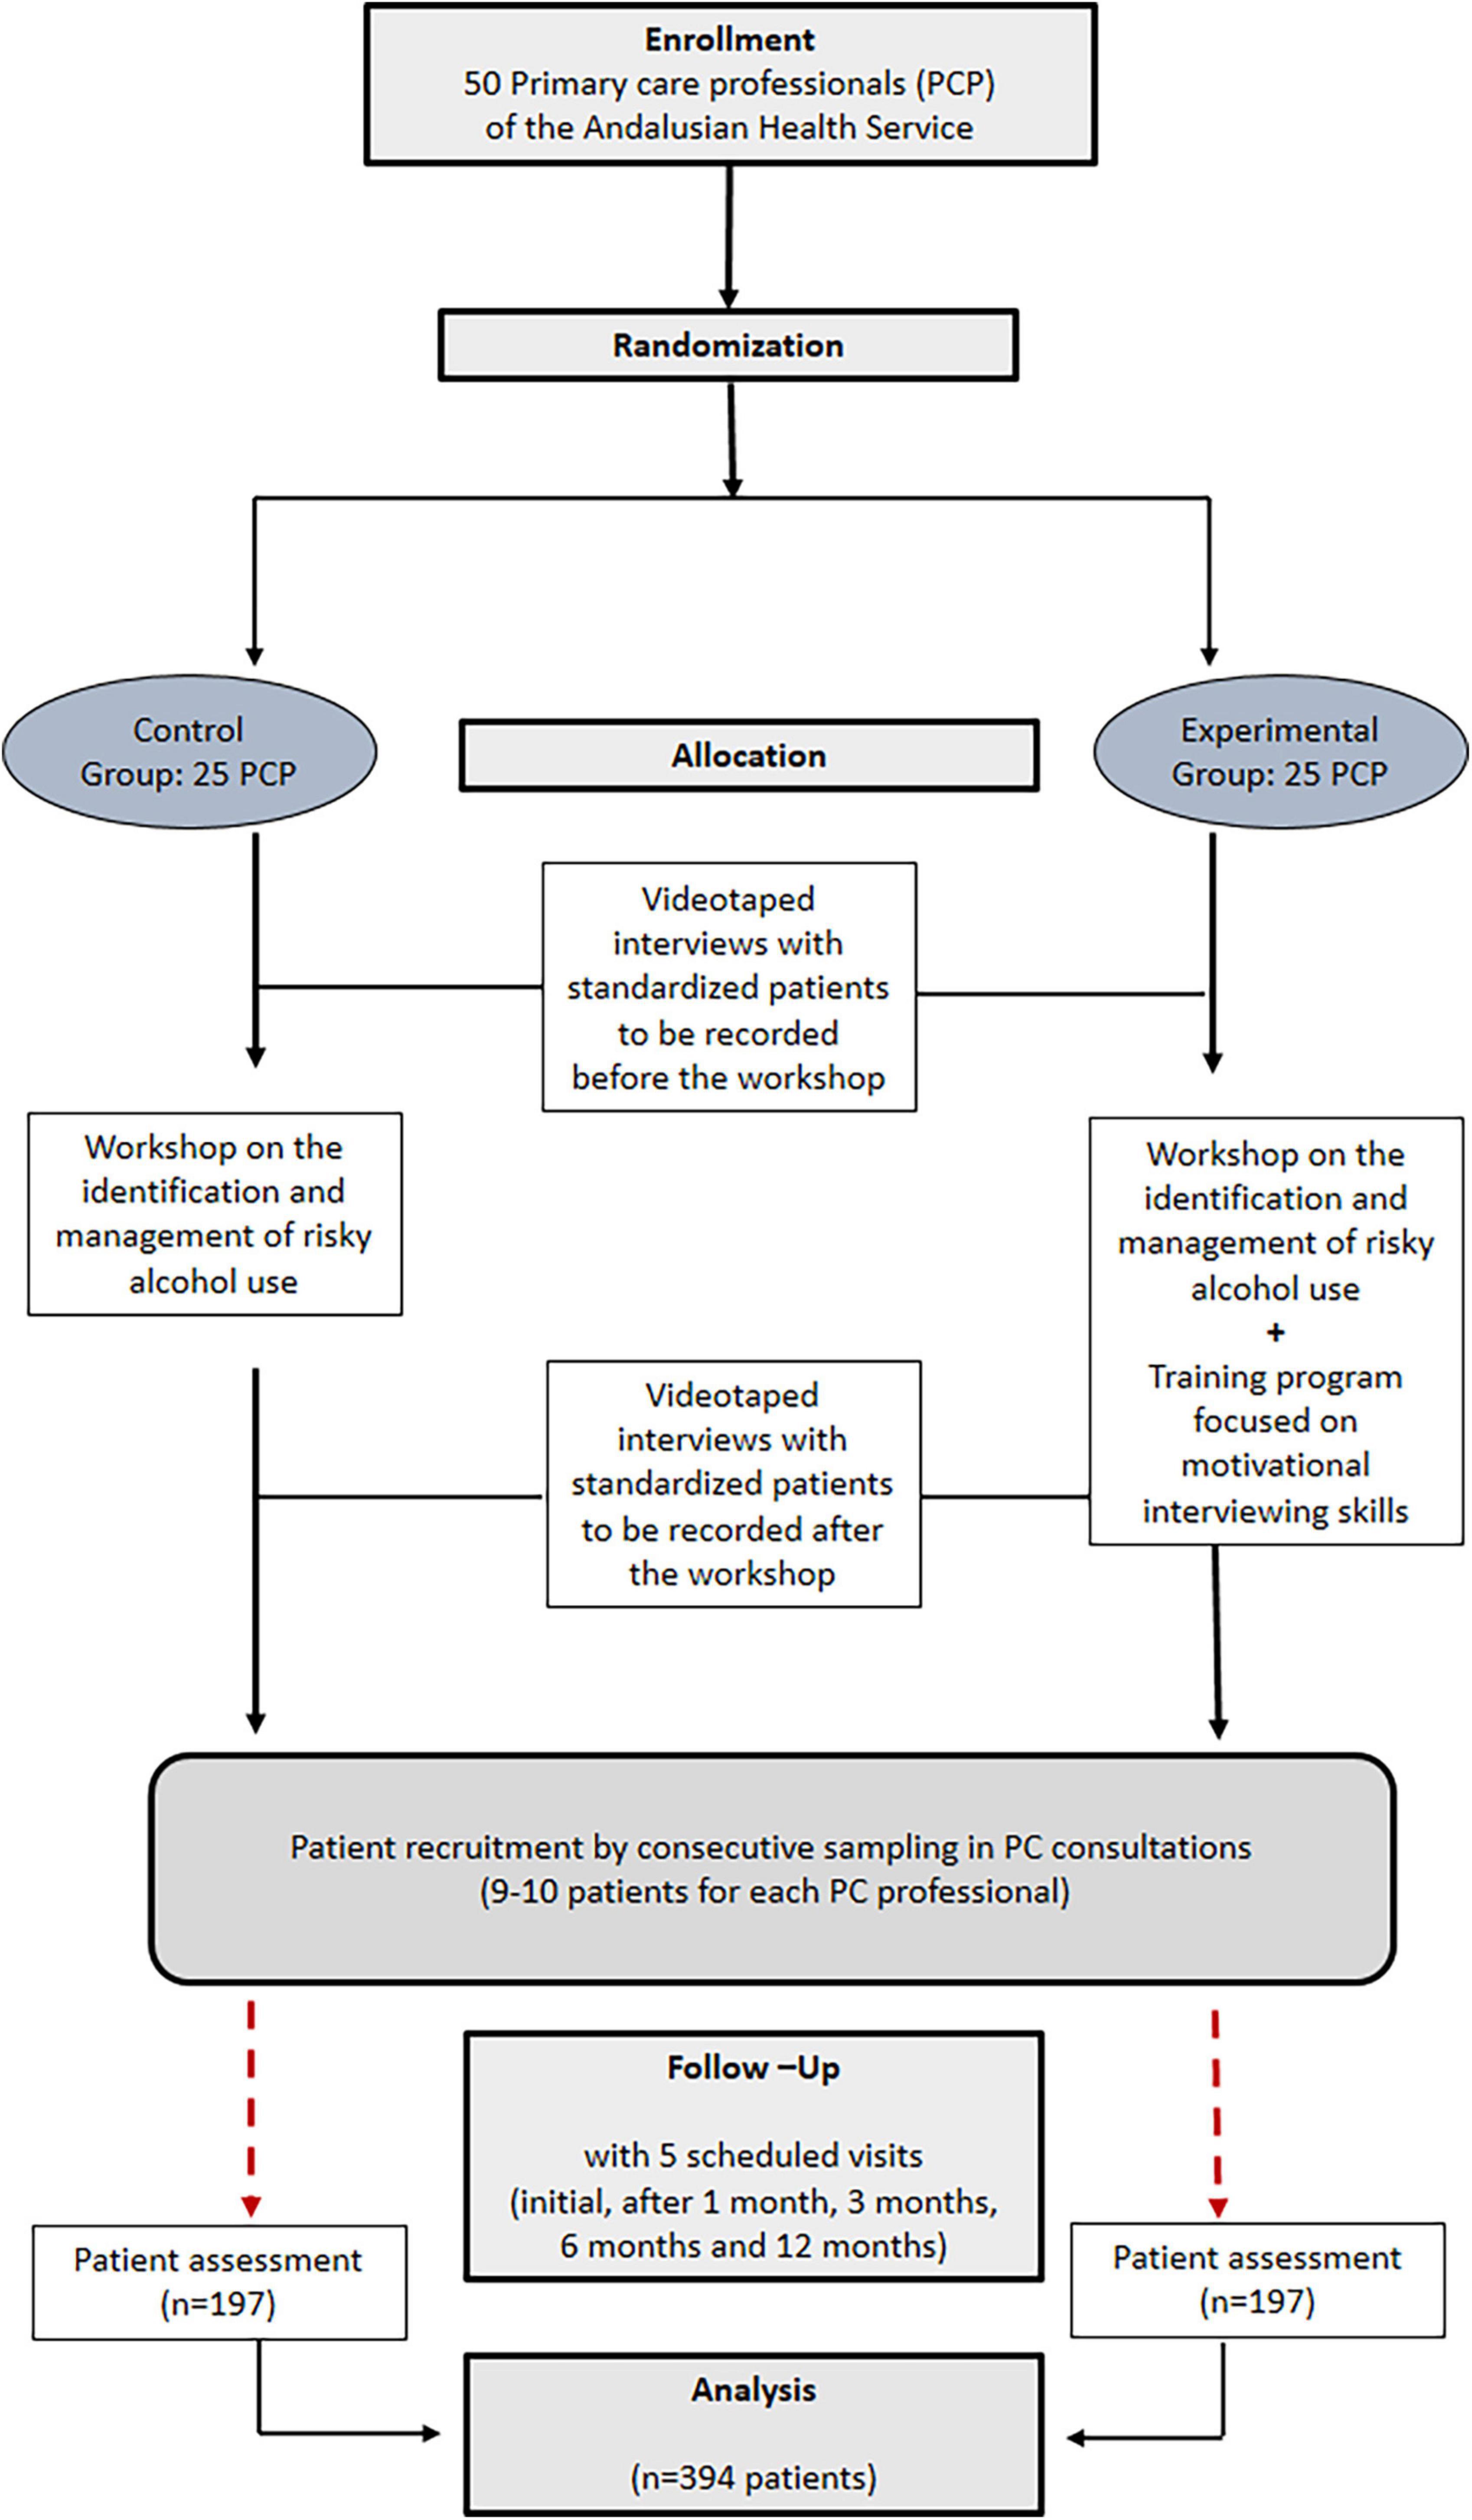 Effectiveness of a brief motivational intervention in the management of risky alcohol use in primary care: ALCO-AP20 study protocol